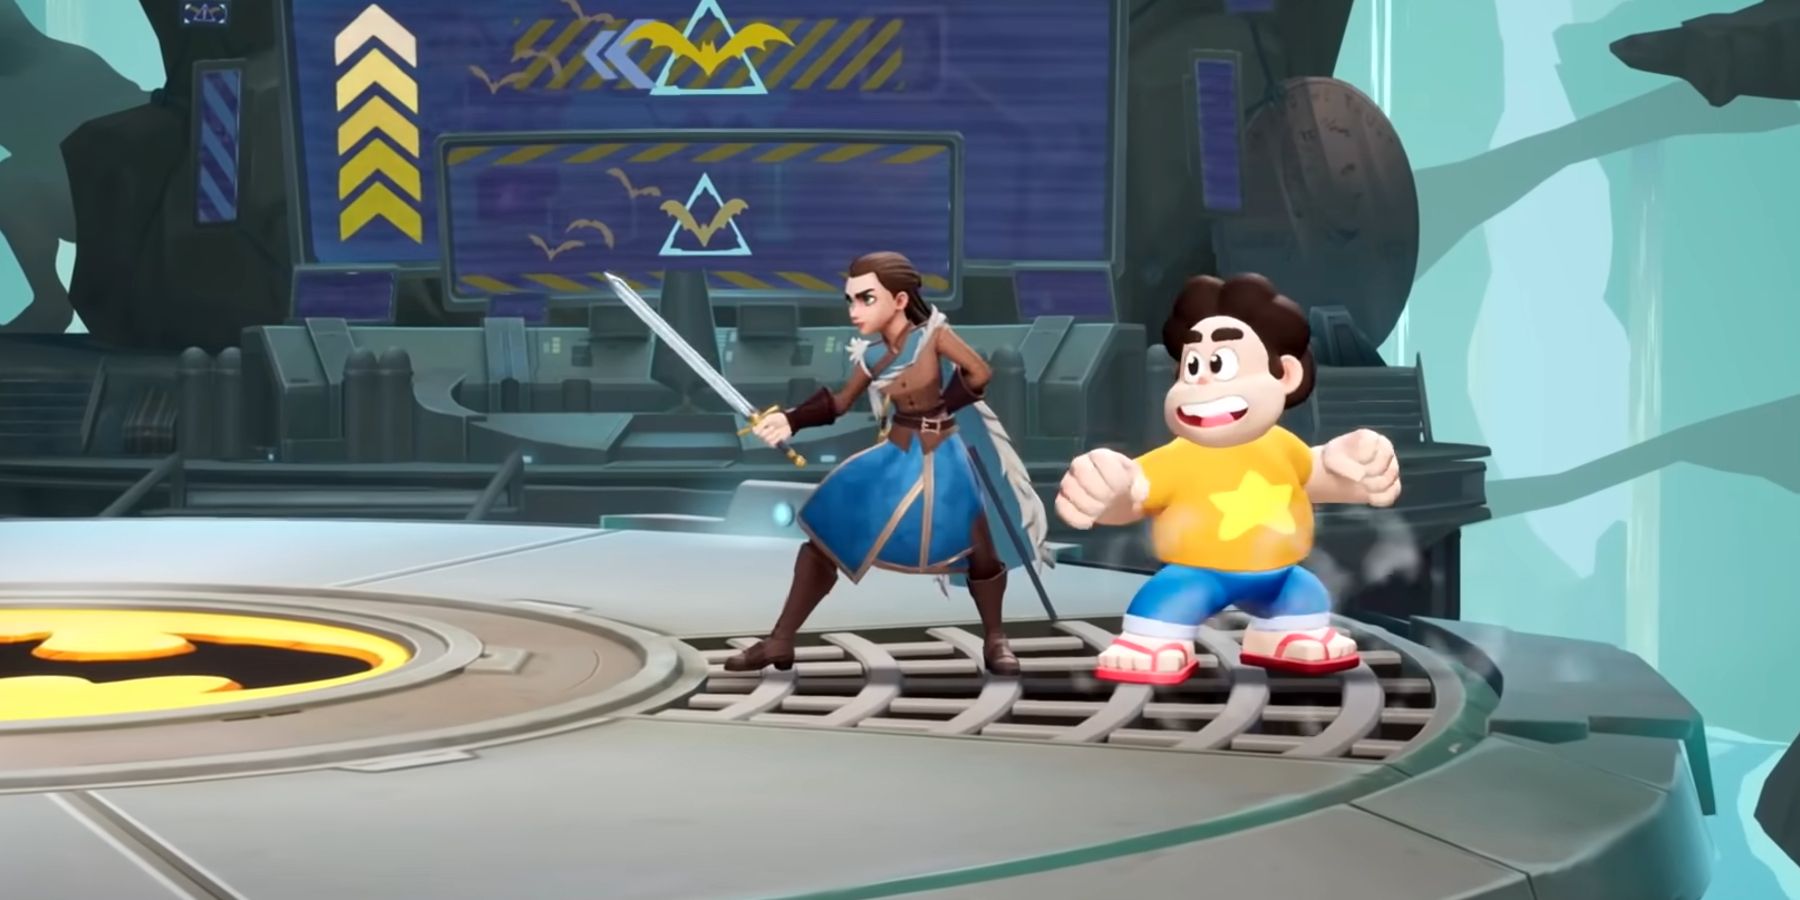 Arya Stark and Steven Universe in the Batcave in MultiVersus